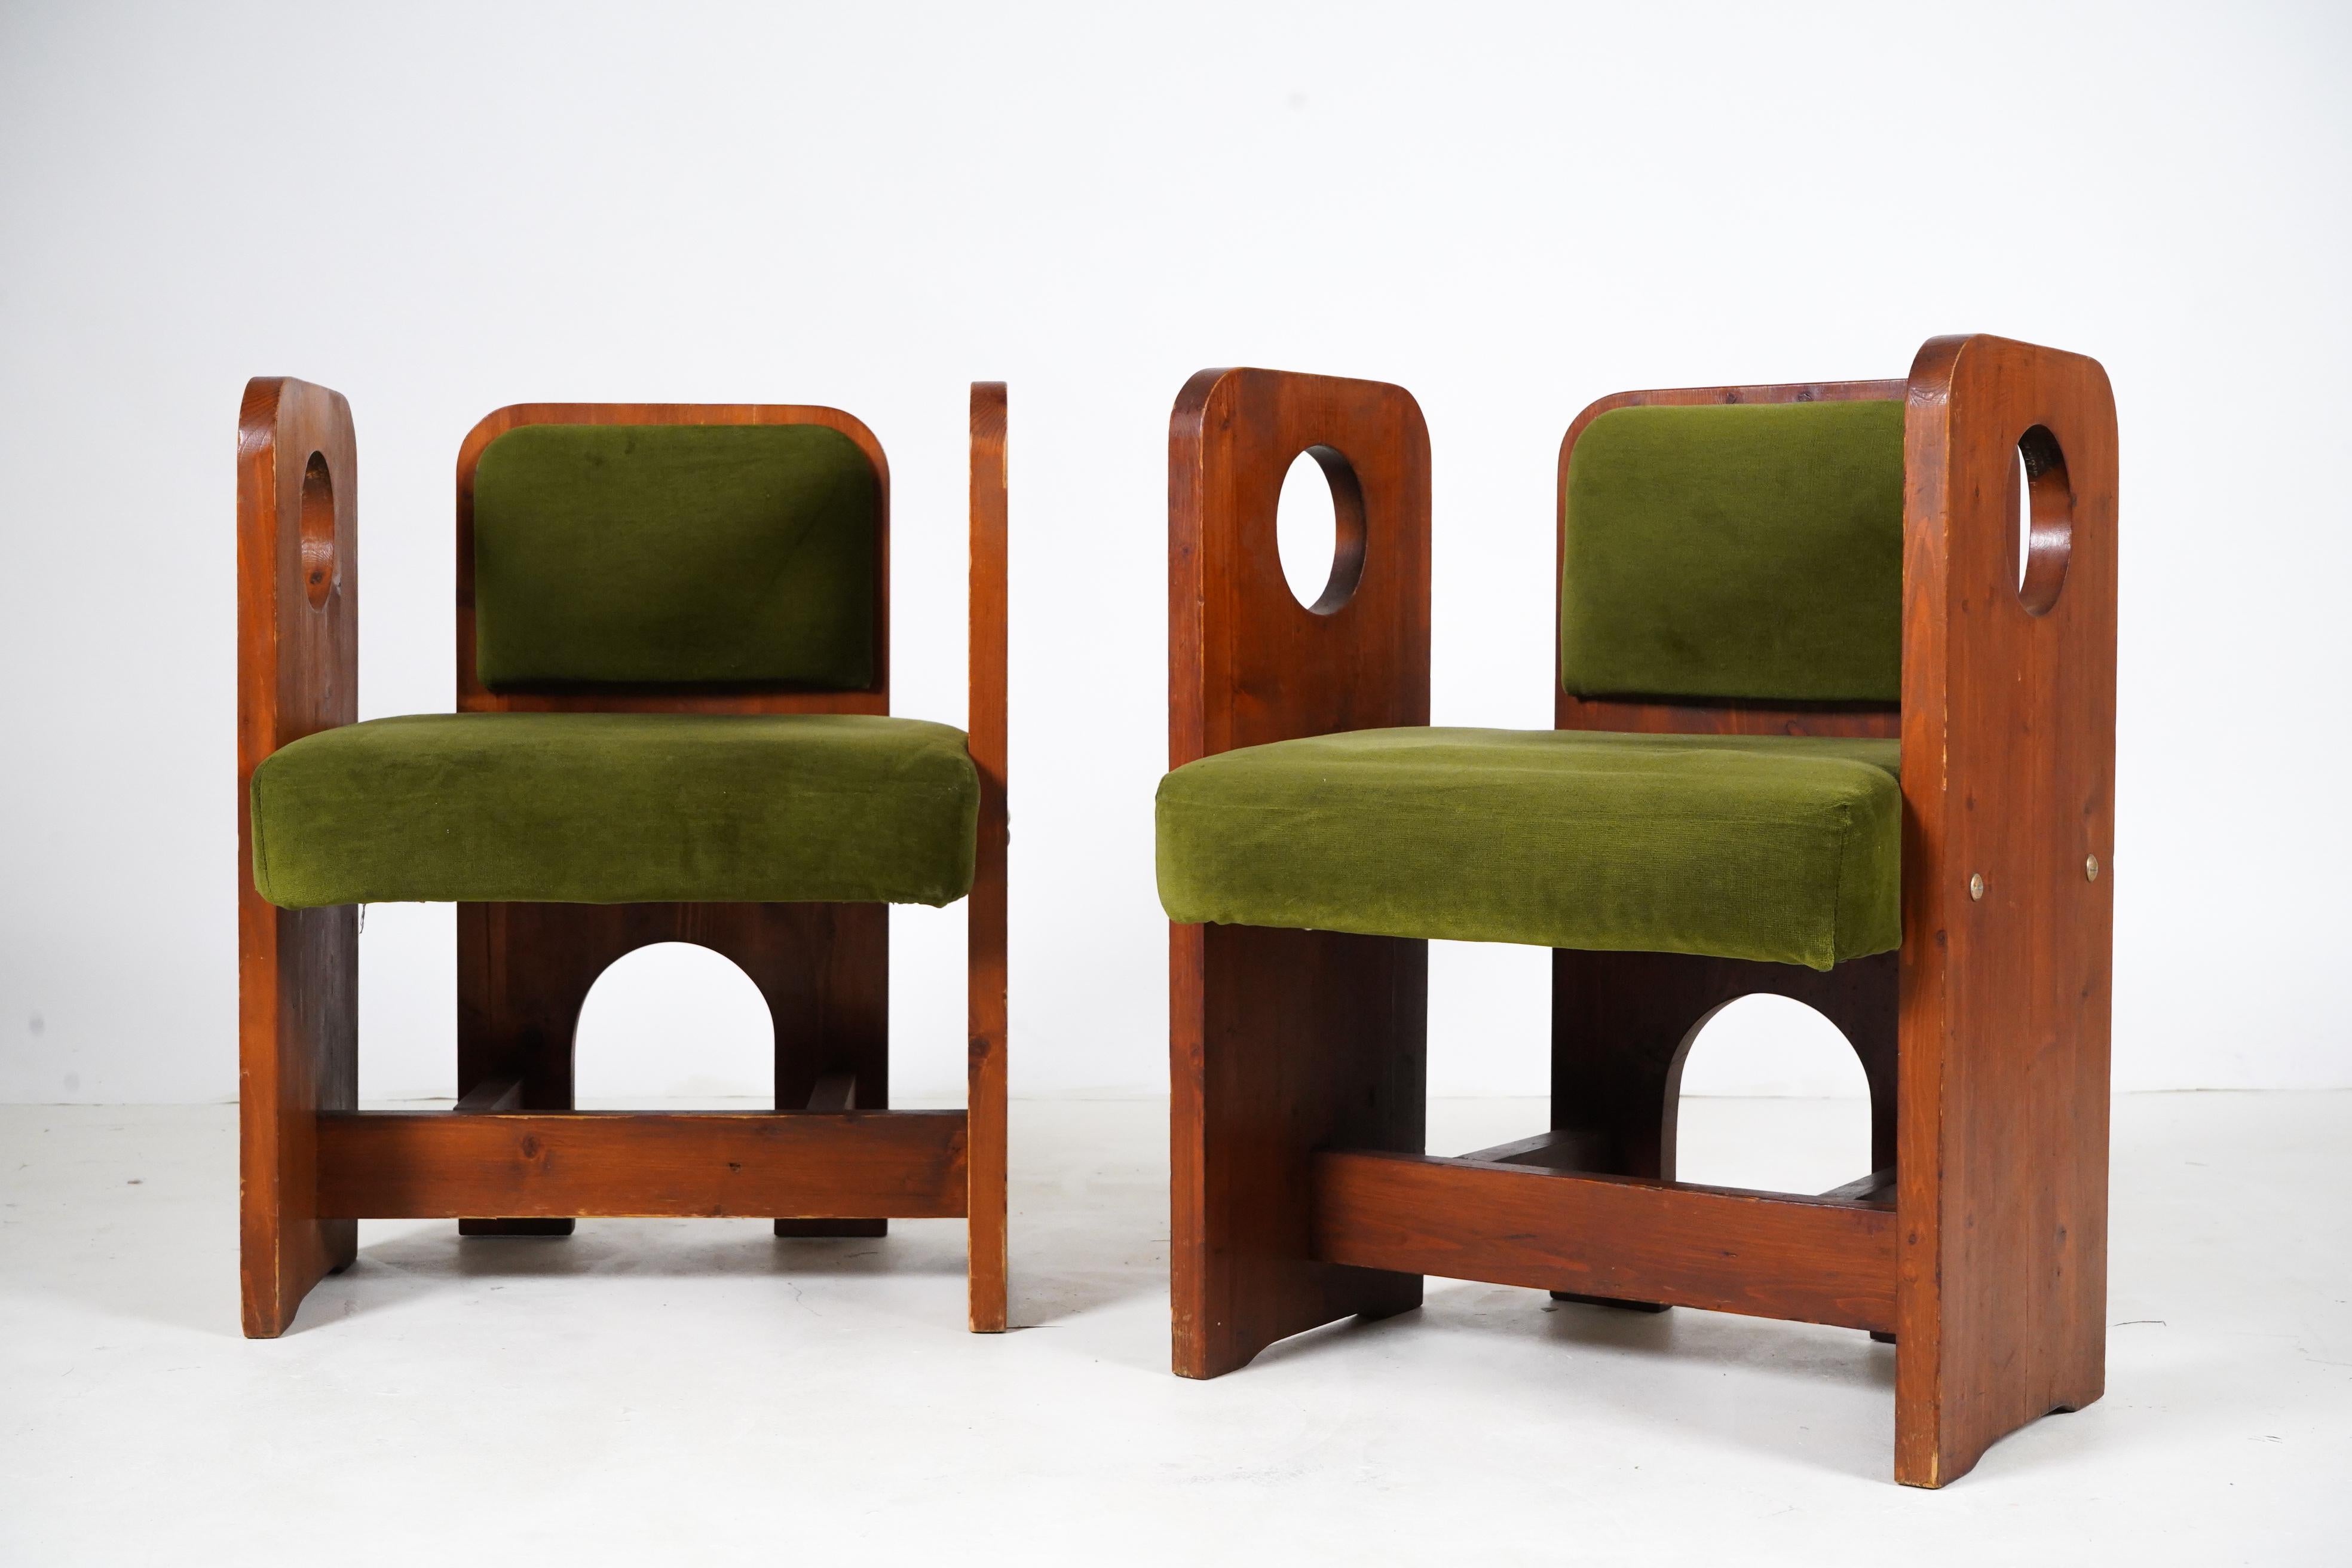 These 1970s-era Brutalist arm chairs were made in Budapest Hungary. During the 1960s and 1970s, Hungarian furniture makers were encouraged to create simple, modern designs that could be mass-produced. They were also intended to compete with Western